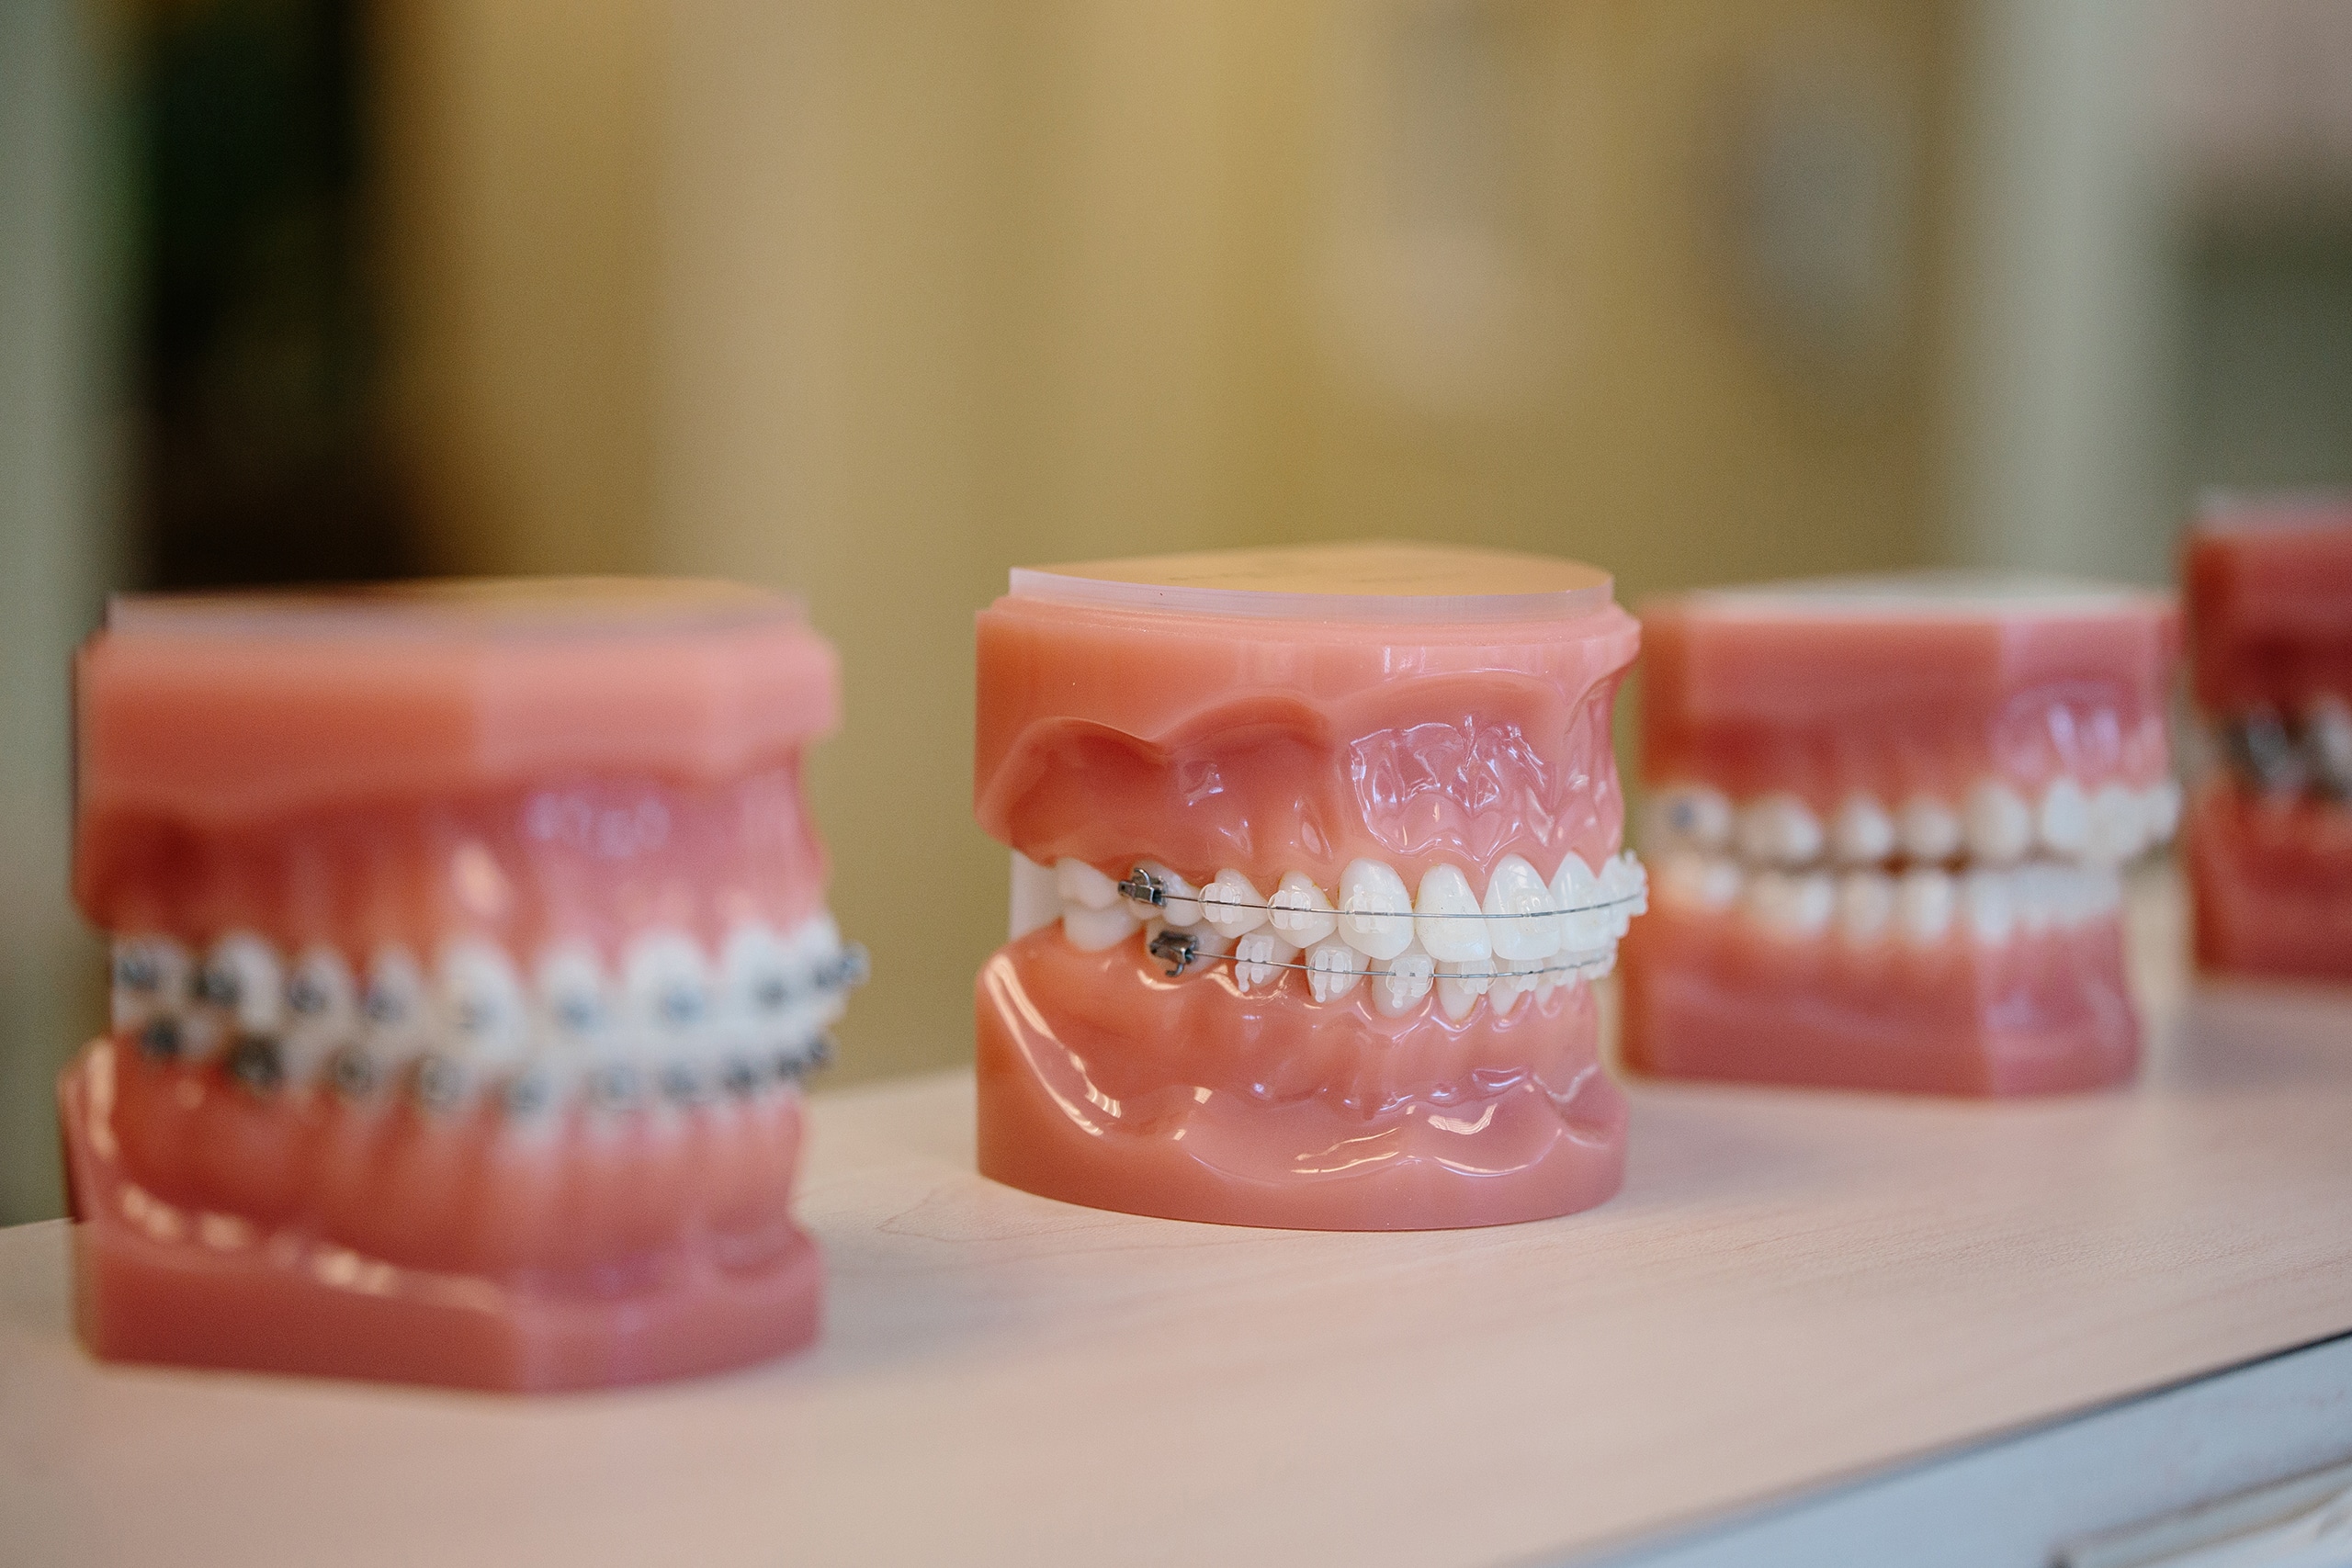 A set of plastic teeth models with metal and clear braces.